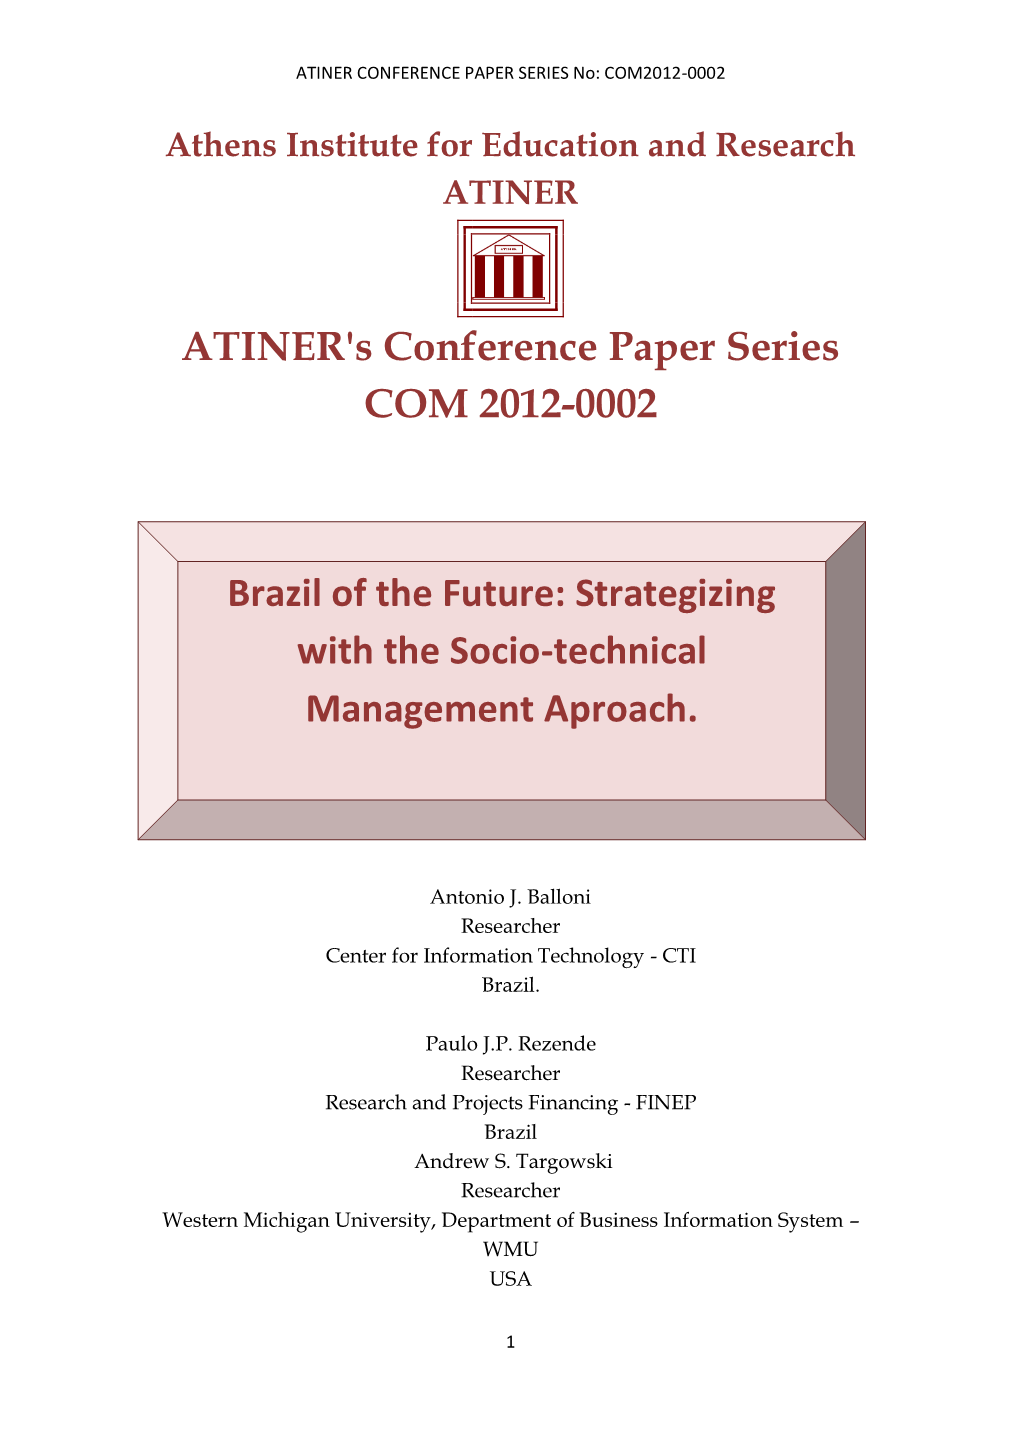 ATINER's Conference Paper Series COM 2012-0002 Brazil of the Future